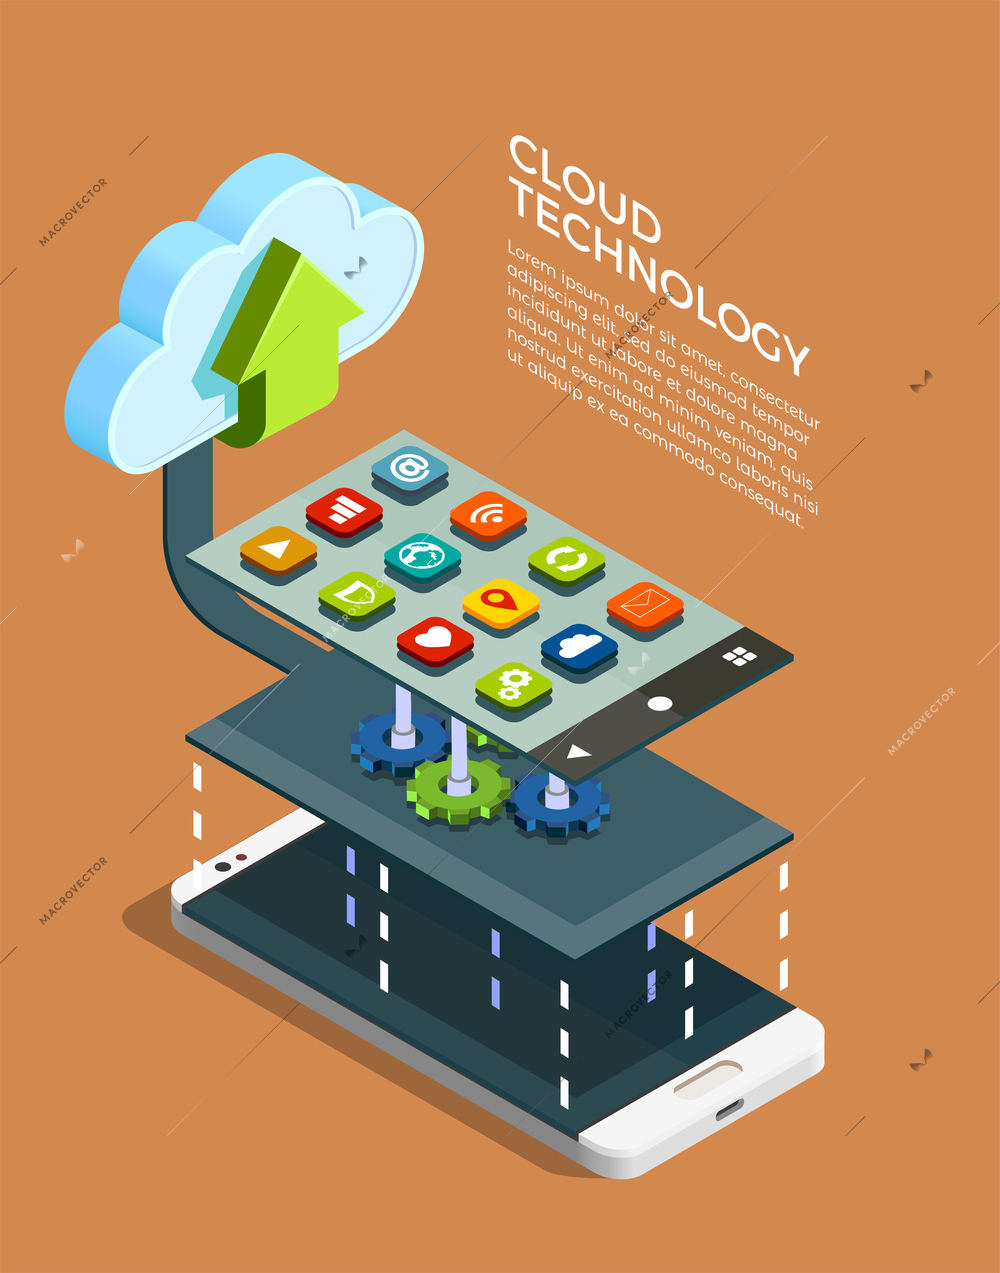 Cloud computing technology network configuration of tablet and smartphones with apps symbols isometric infographic elements poster vector illustration